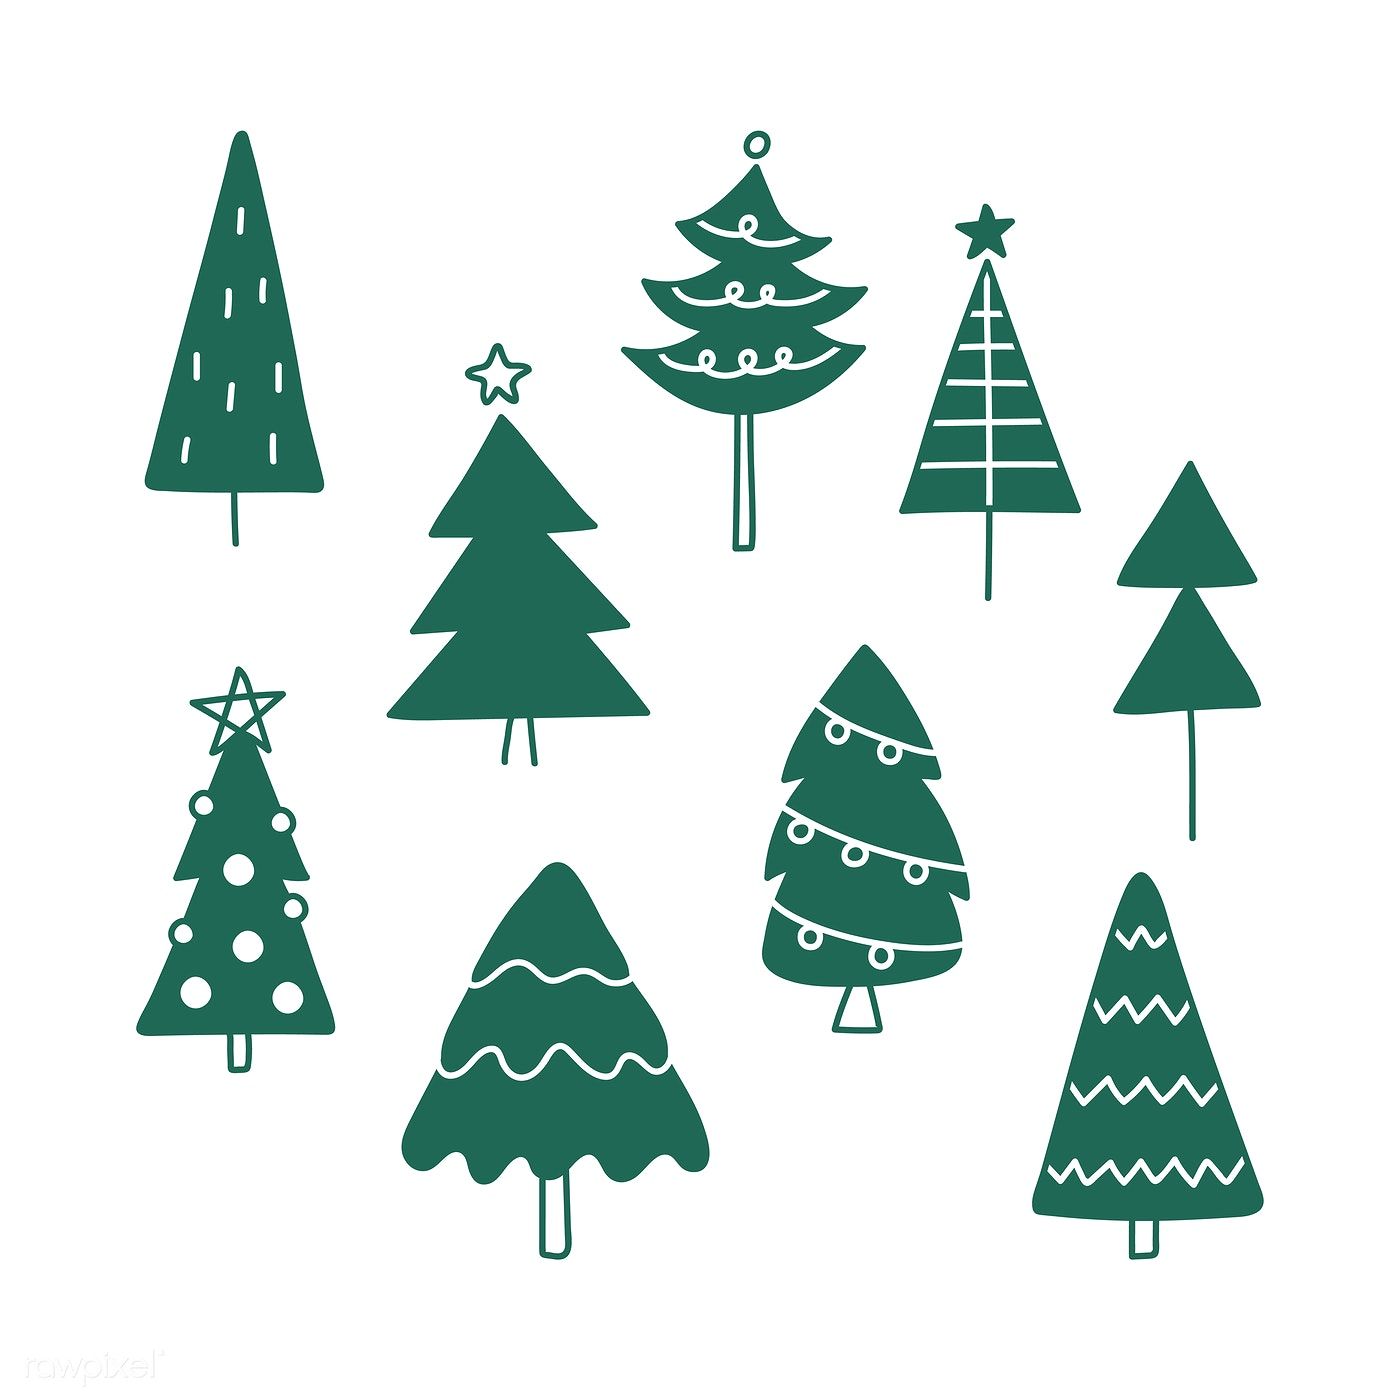 How to draw a Christmas tree step by step - Gathered